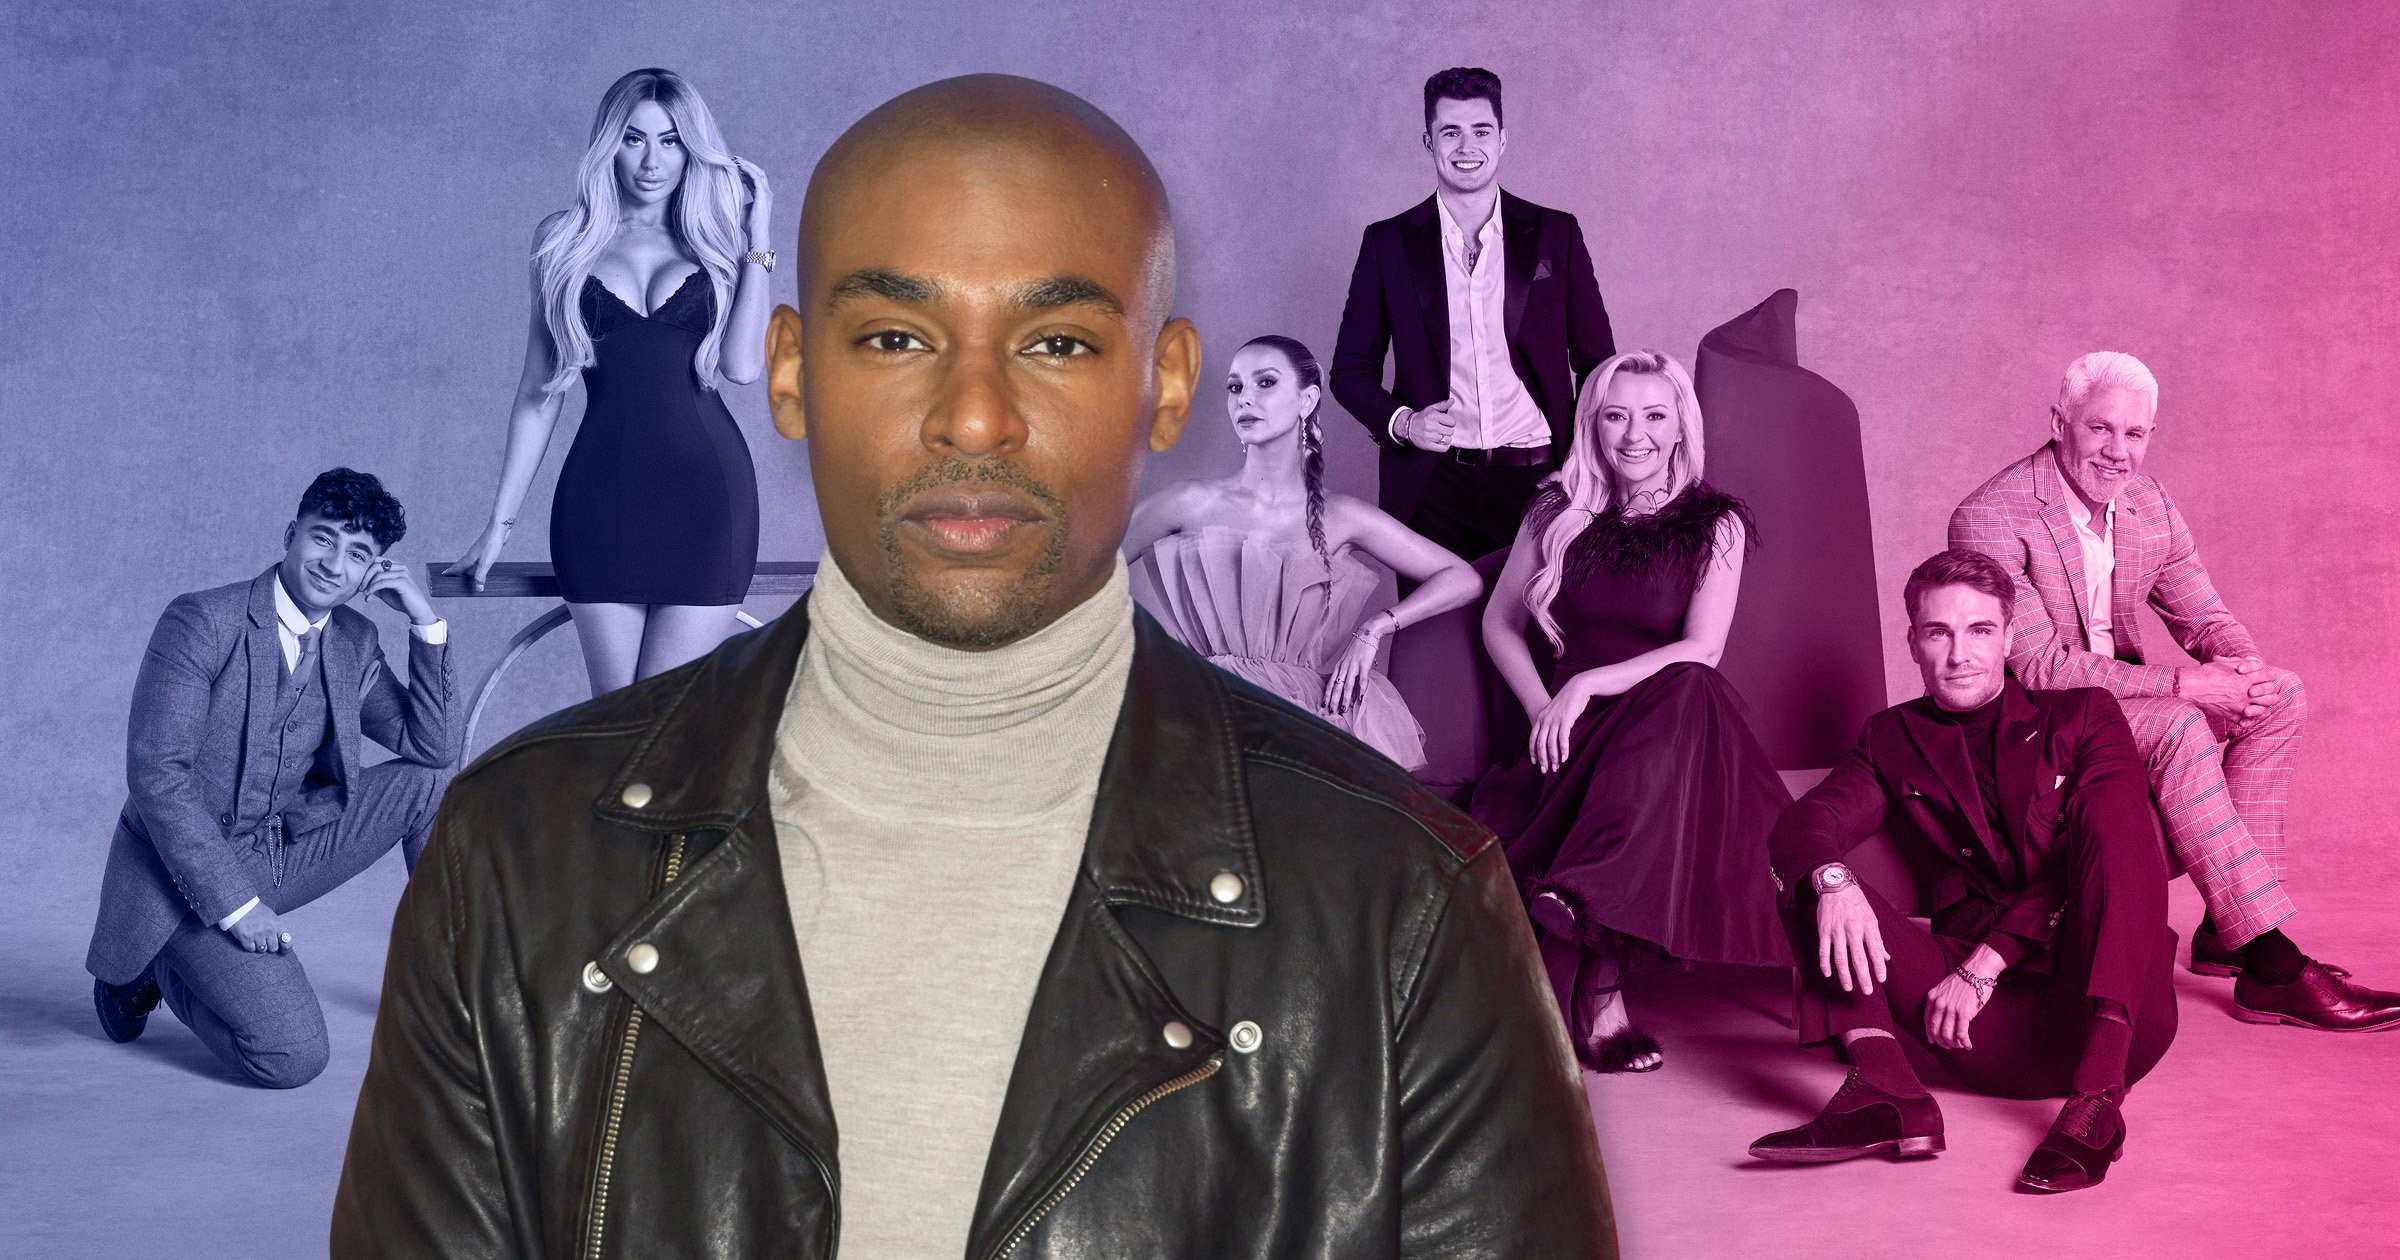 Celebs Go Dating’s Paul Carrick Brunson says ‘goodbye’ to show after huge off-air row with star